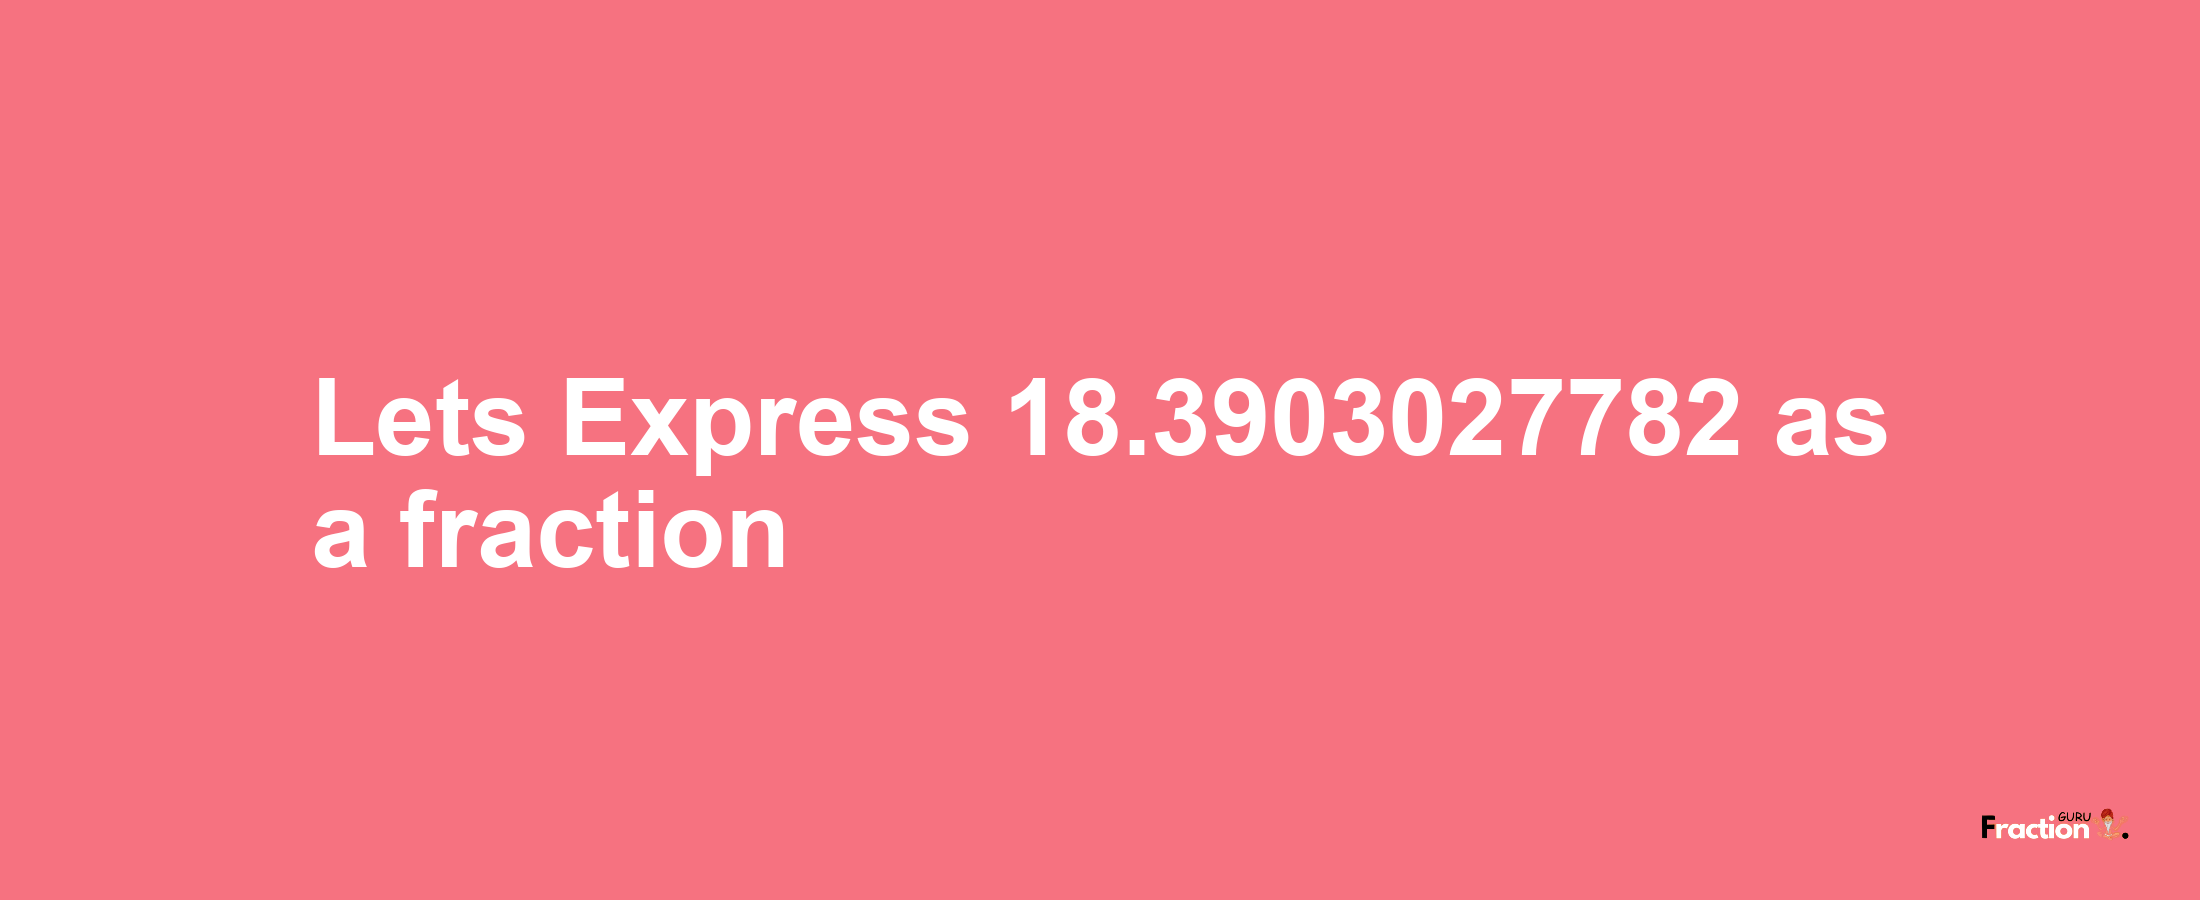 Lets Express 18.3903027782 as afraction